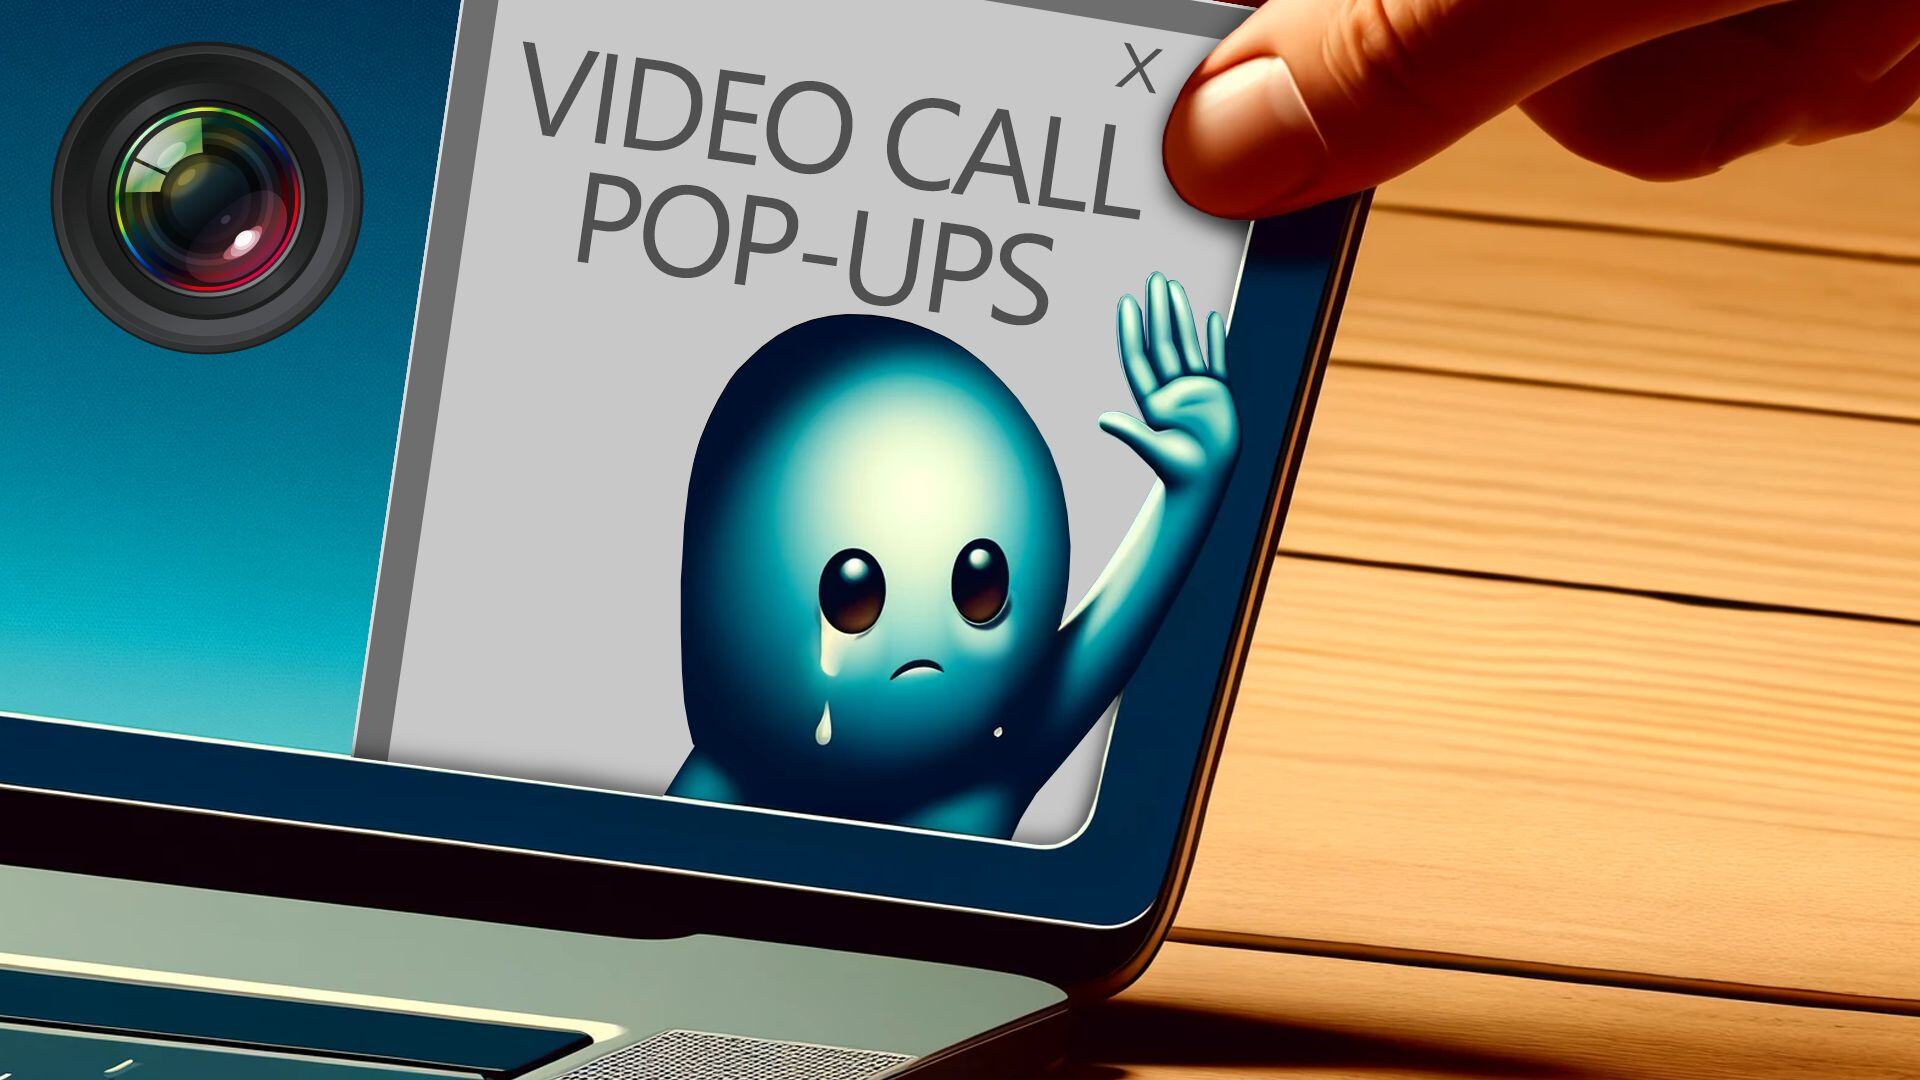 Say goodbye to video call pop-ups